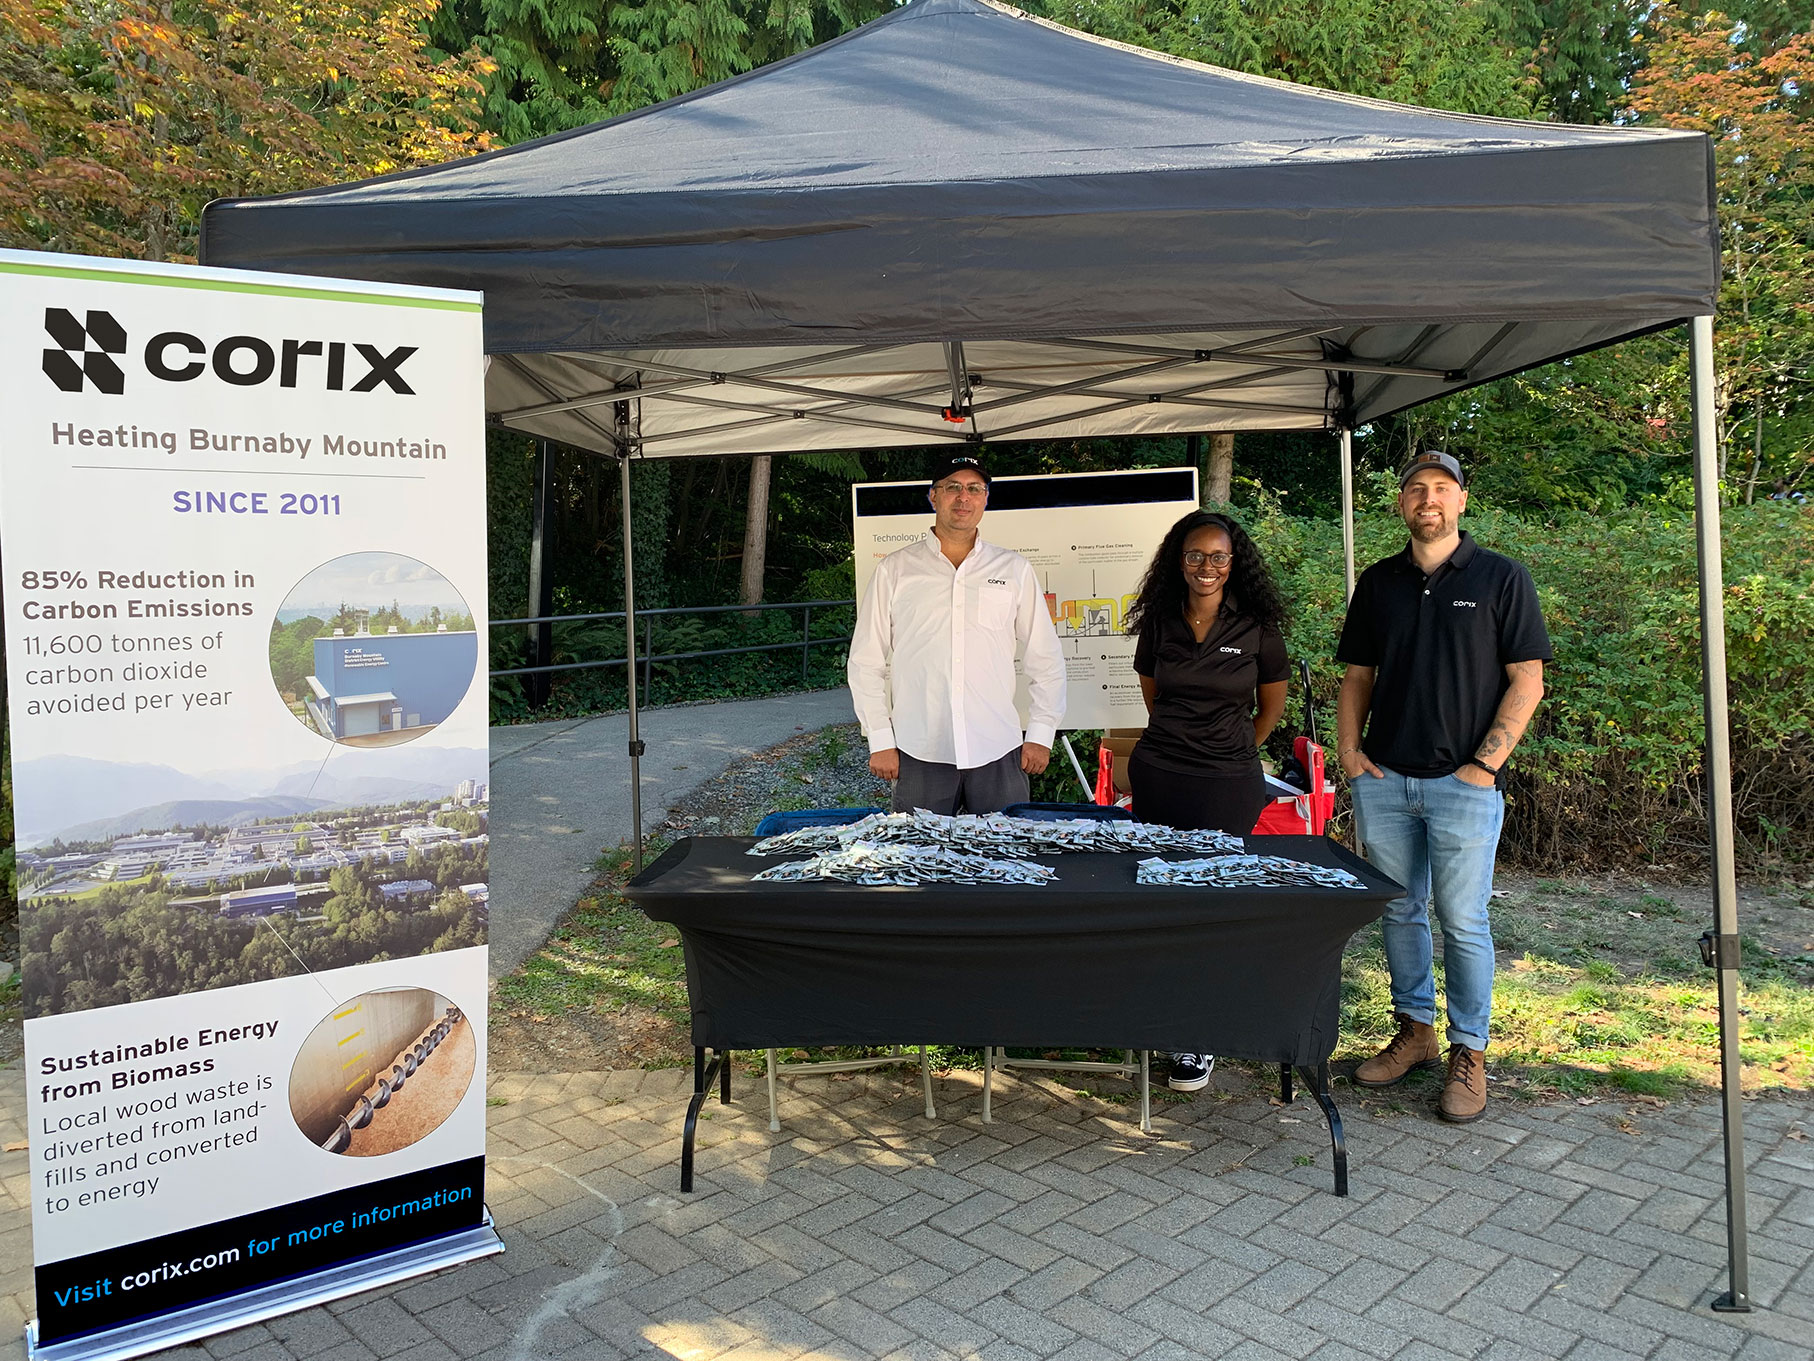 Corix employees at an event